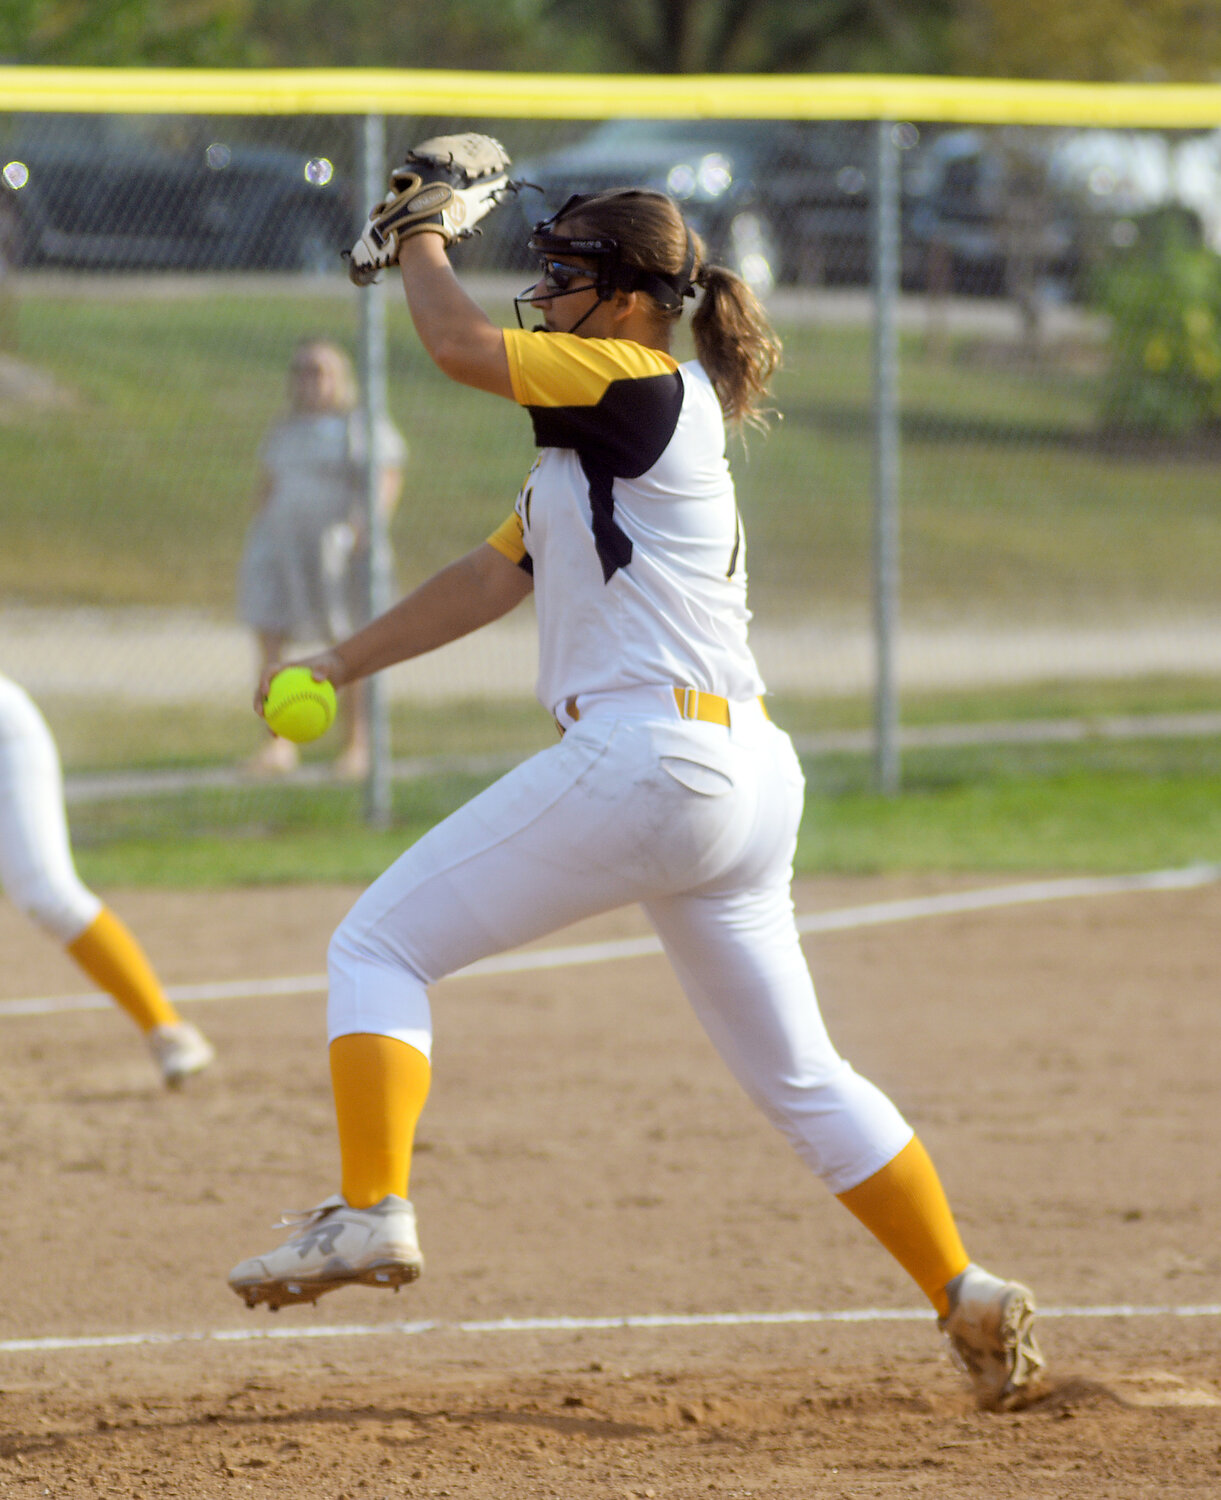 Simmons also helped the Lady Eagles win two district championships and two GVC titles during her time in the pitching circle.